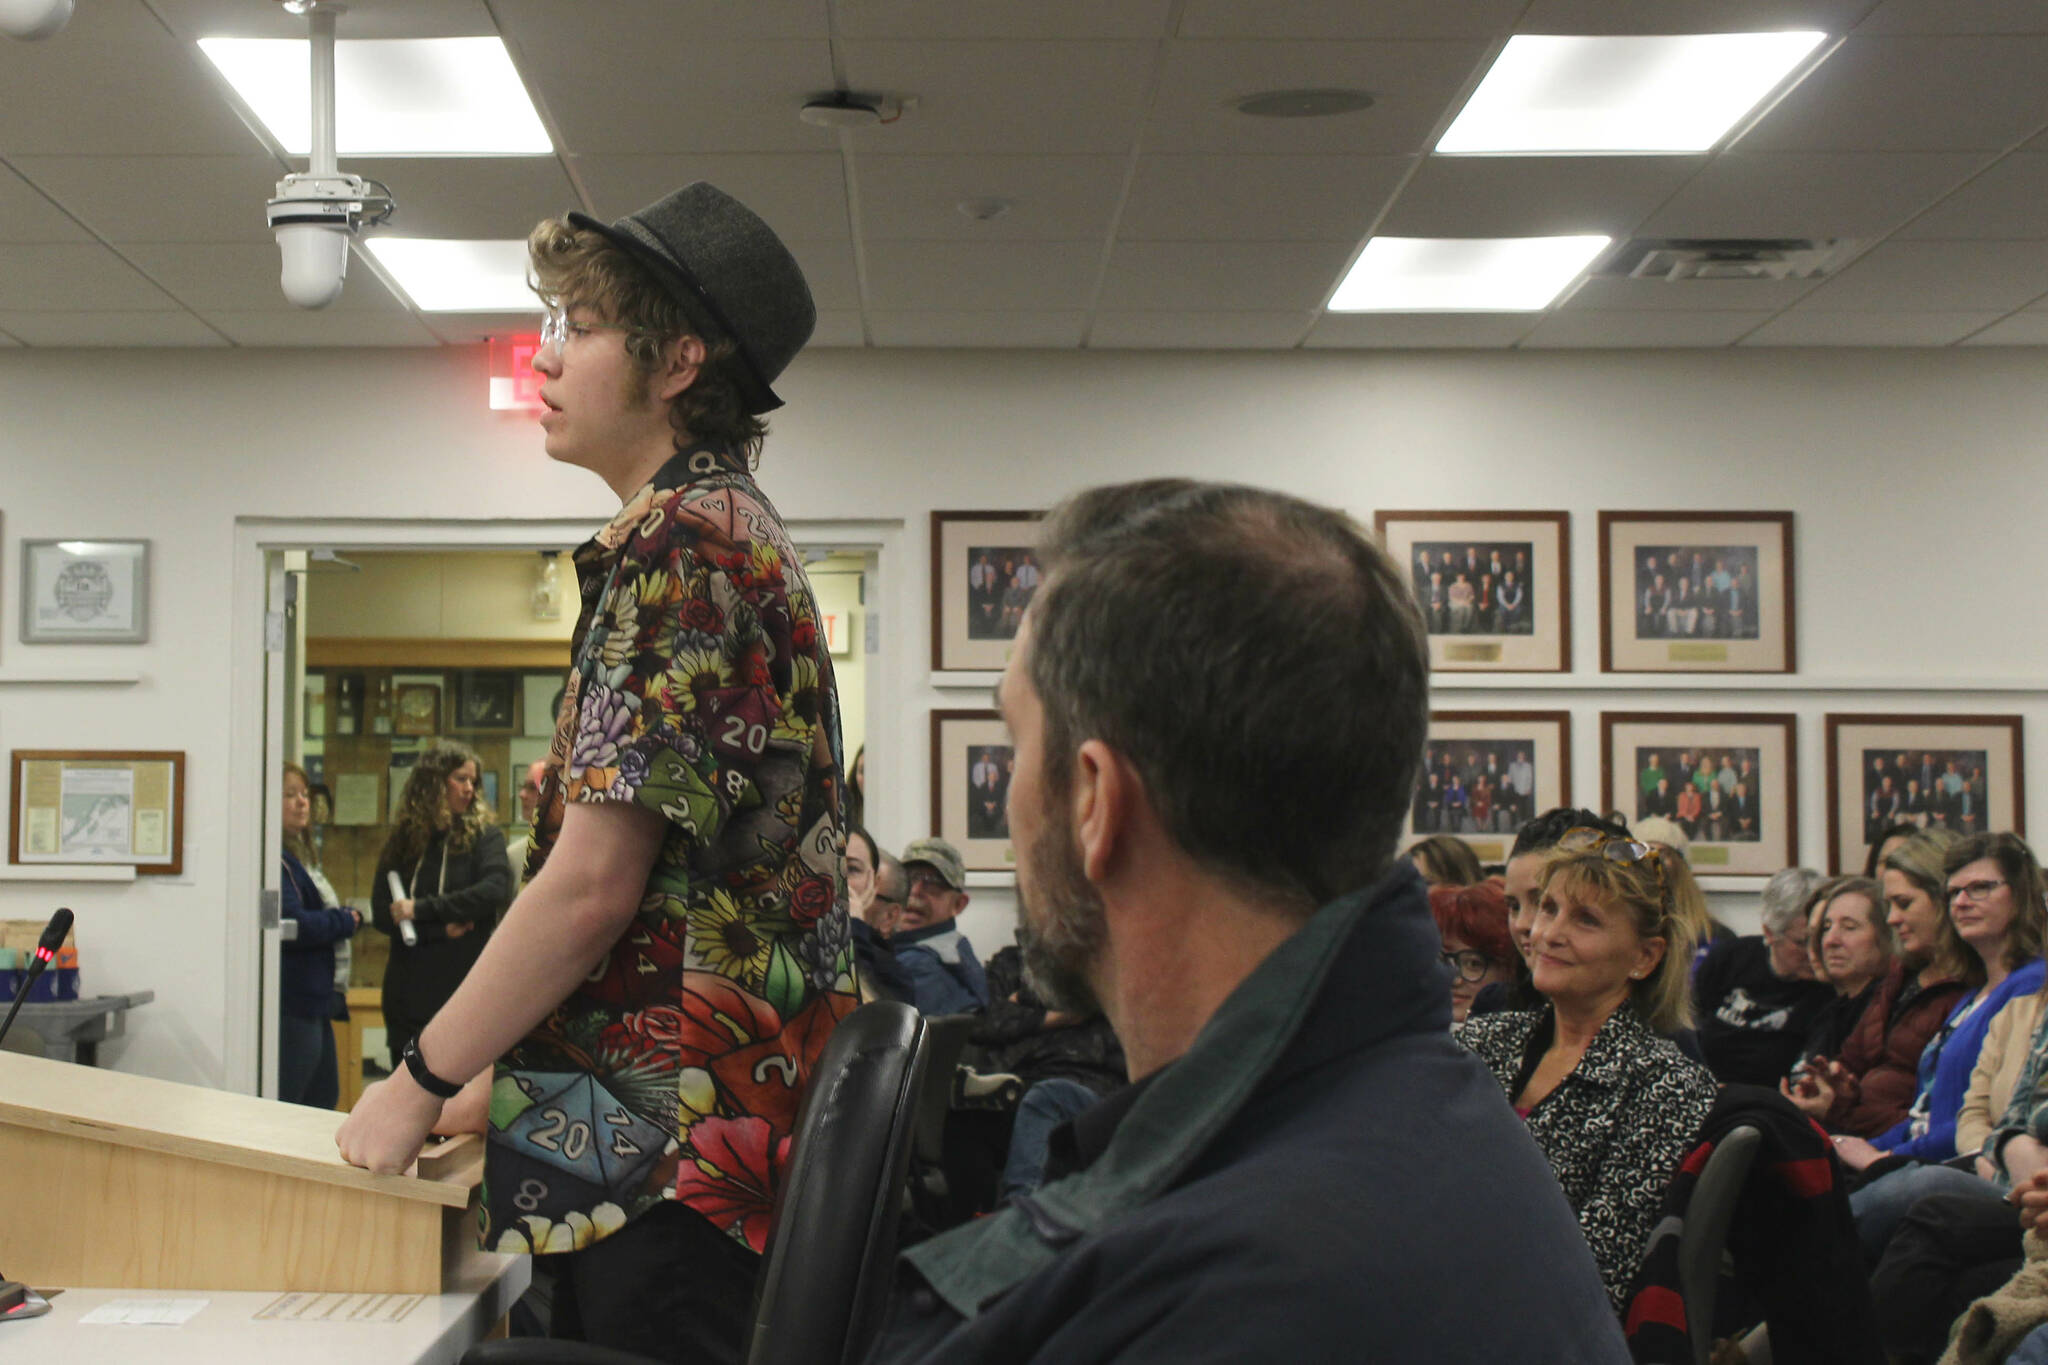 Soldotna High School senior Josiah Burton testifies in opposition to the proposed cut of Kenai Peninsula Borough School District theater technicians while audience members look on during a board of education meeting on Monday, March 6, 2023, in Soldotna, Alaska. (Ashlyn O’Hara/Peninsula Clarion)